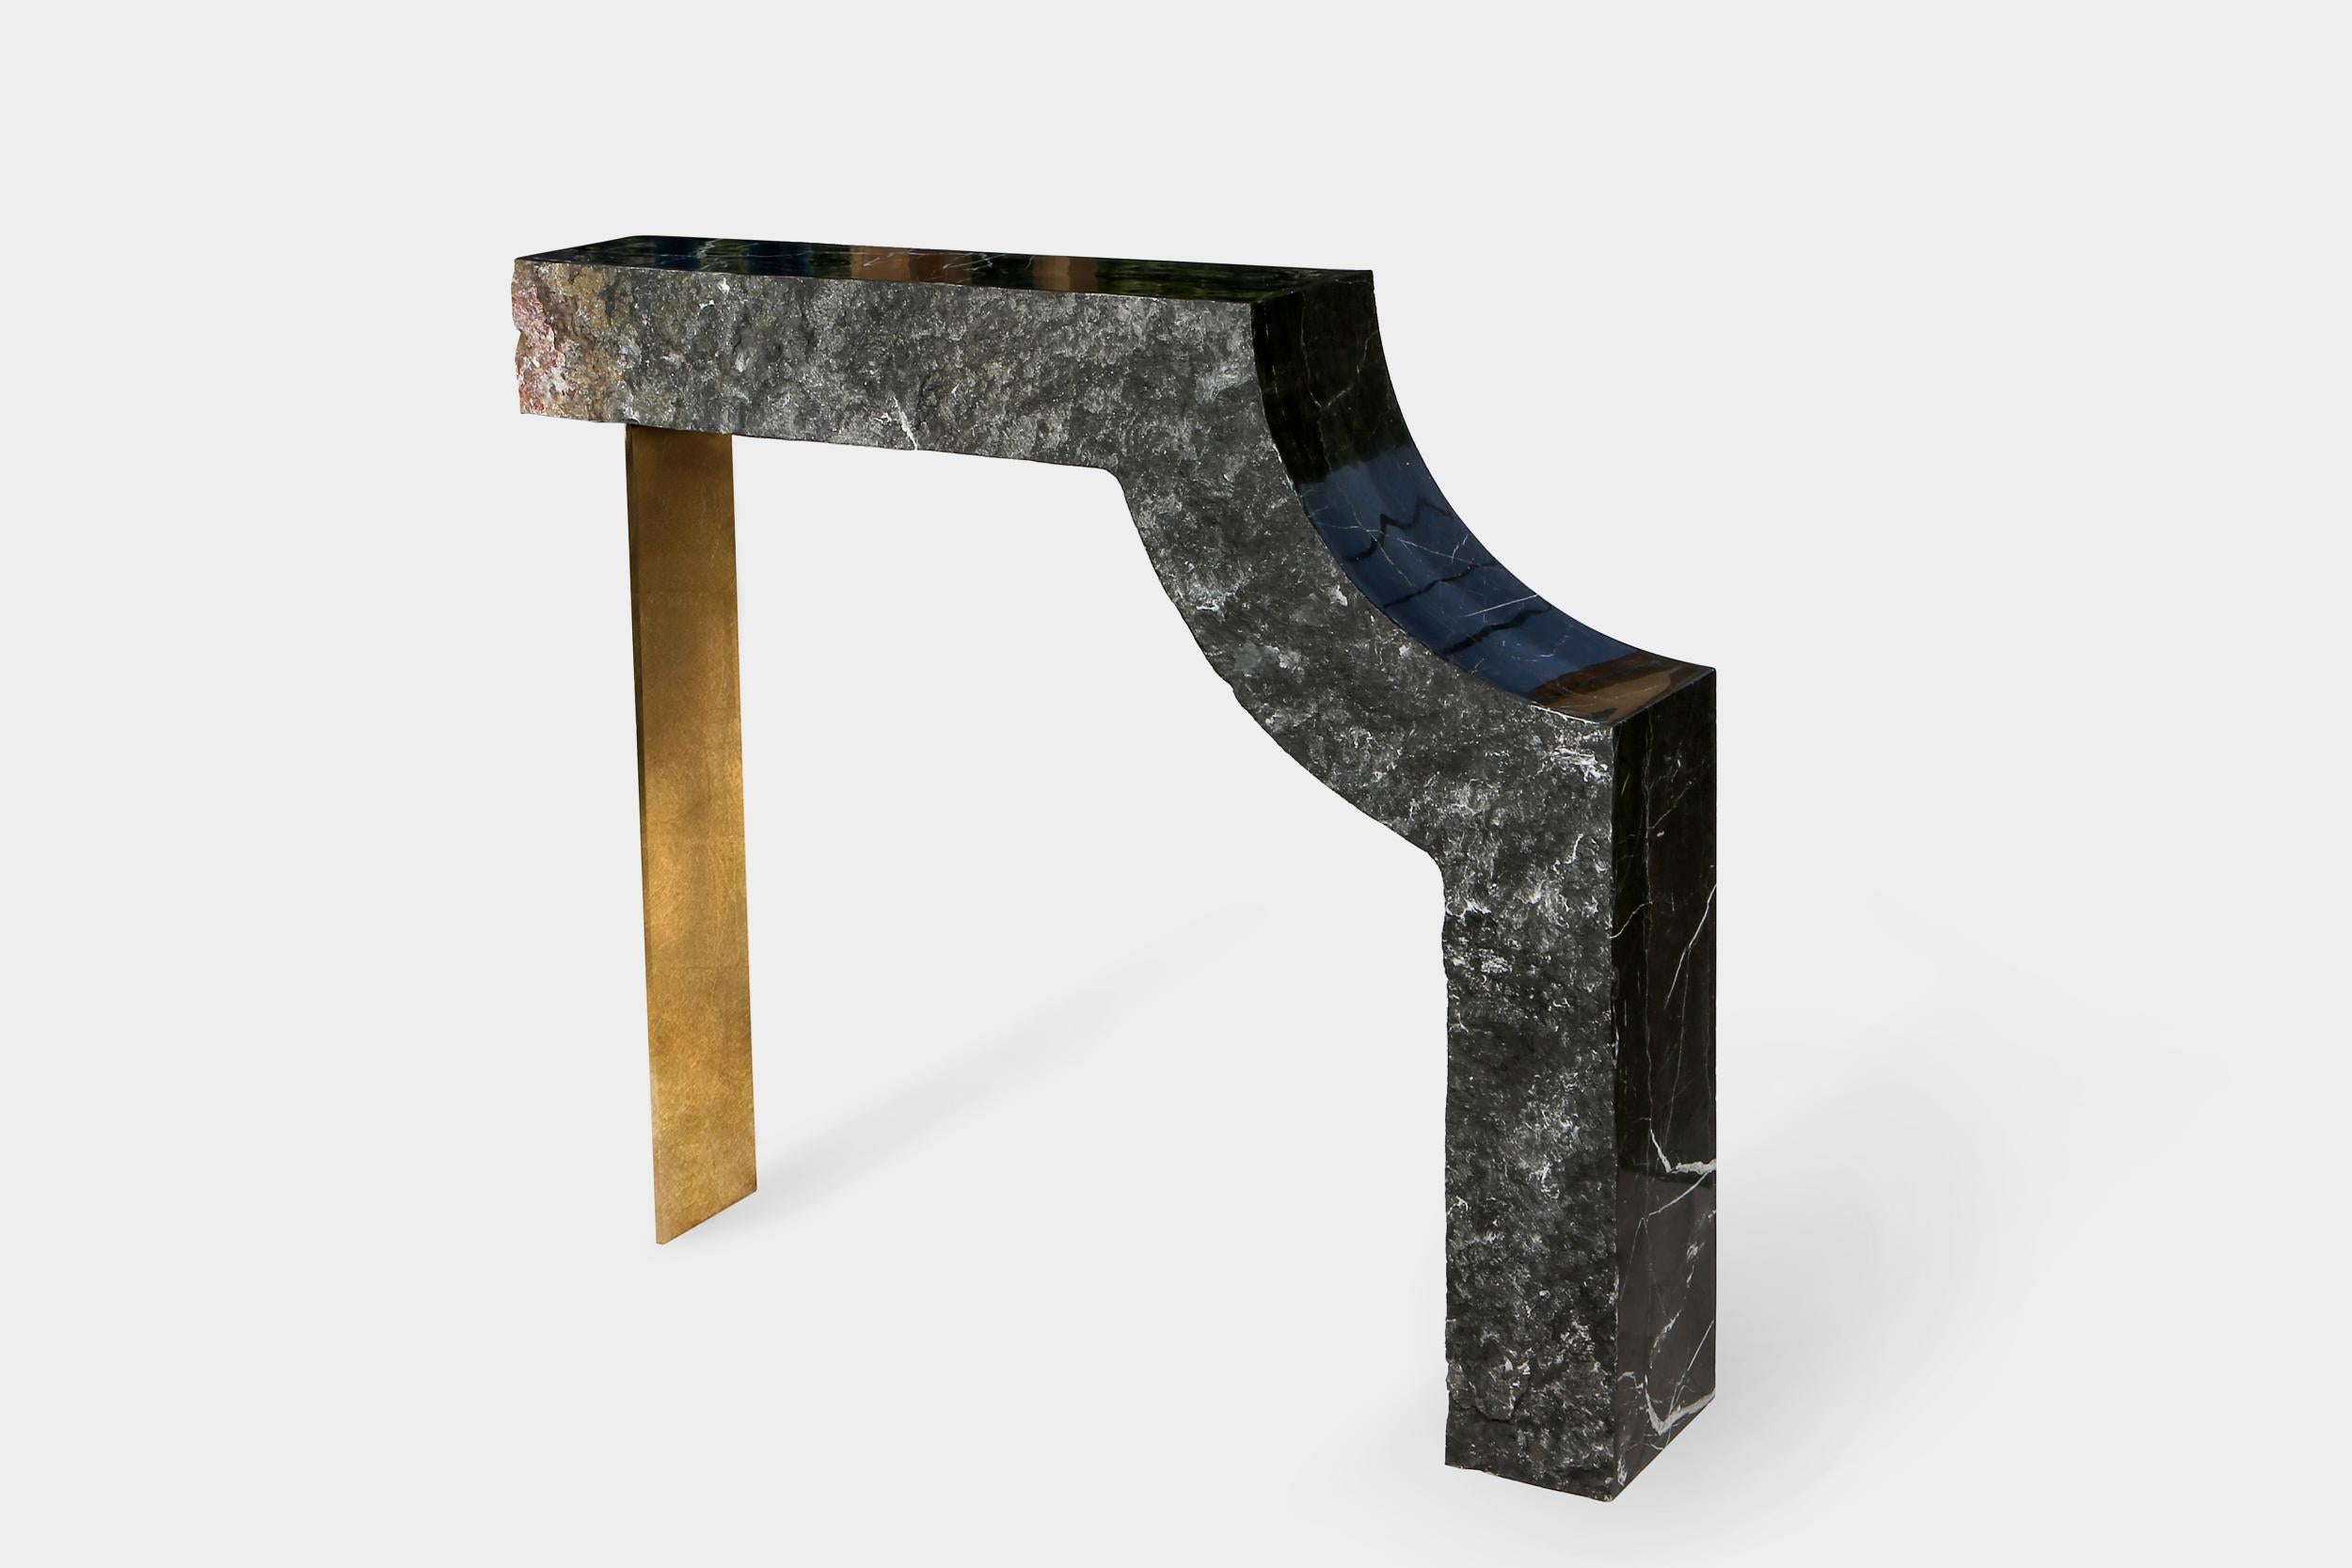 Found II Console Table No.1 by A Space
Dimensions: D 94 x W 25 x H 84cm
Materials: Marble, steel, gold leaf.

Spontaneity, environmental awareness and the primeval nature of the materials are central themes explored in this collection, which